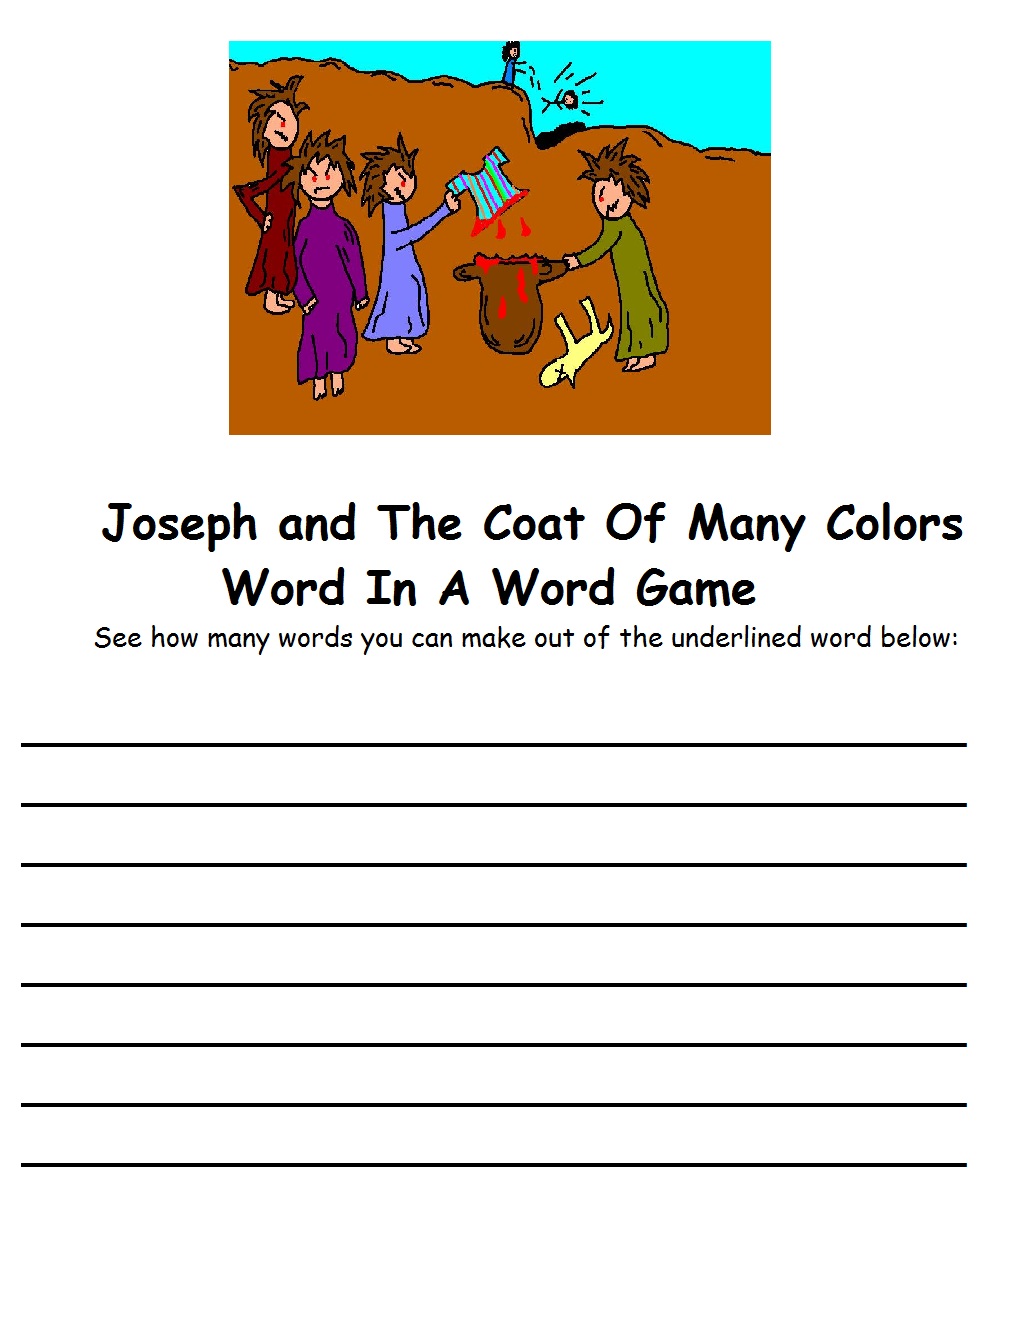 joseph-and-the-coat-of-many-colors-sunday-school-lesson